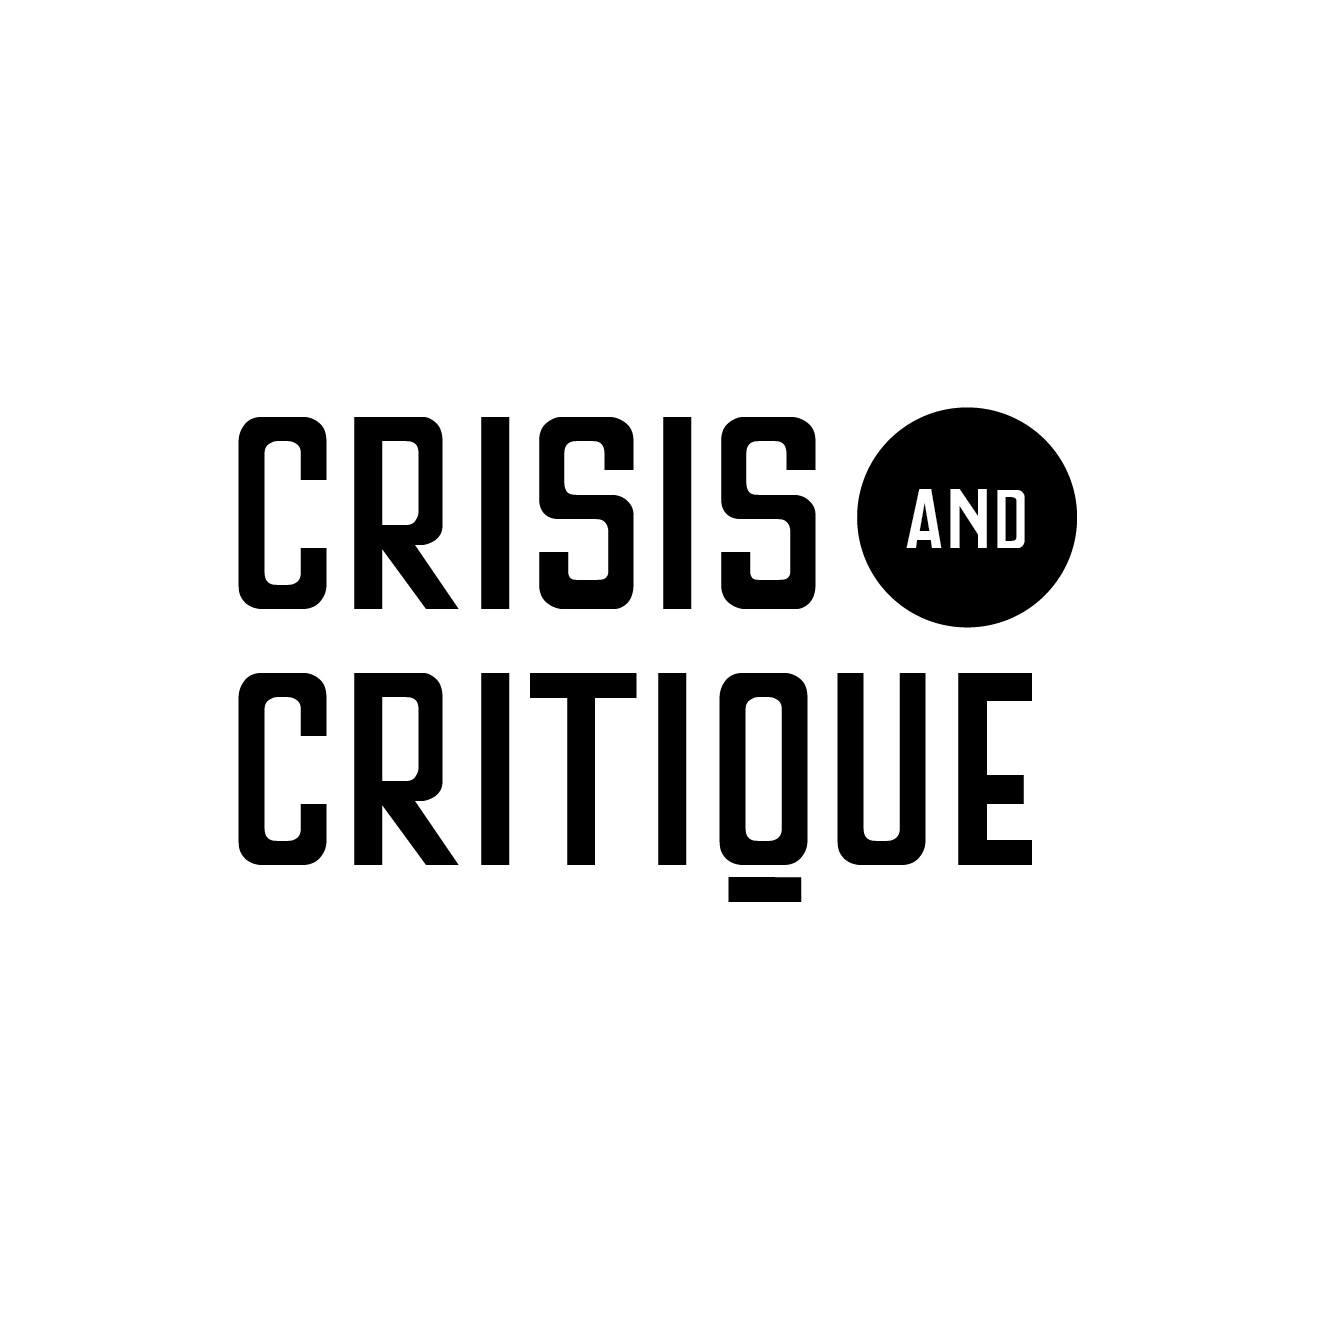 • Crisis and Critique journal of political thought and philosophy • Crisis and Critique Podcast • Support our work at https://t.co/LhLRESltPa